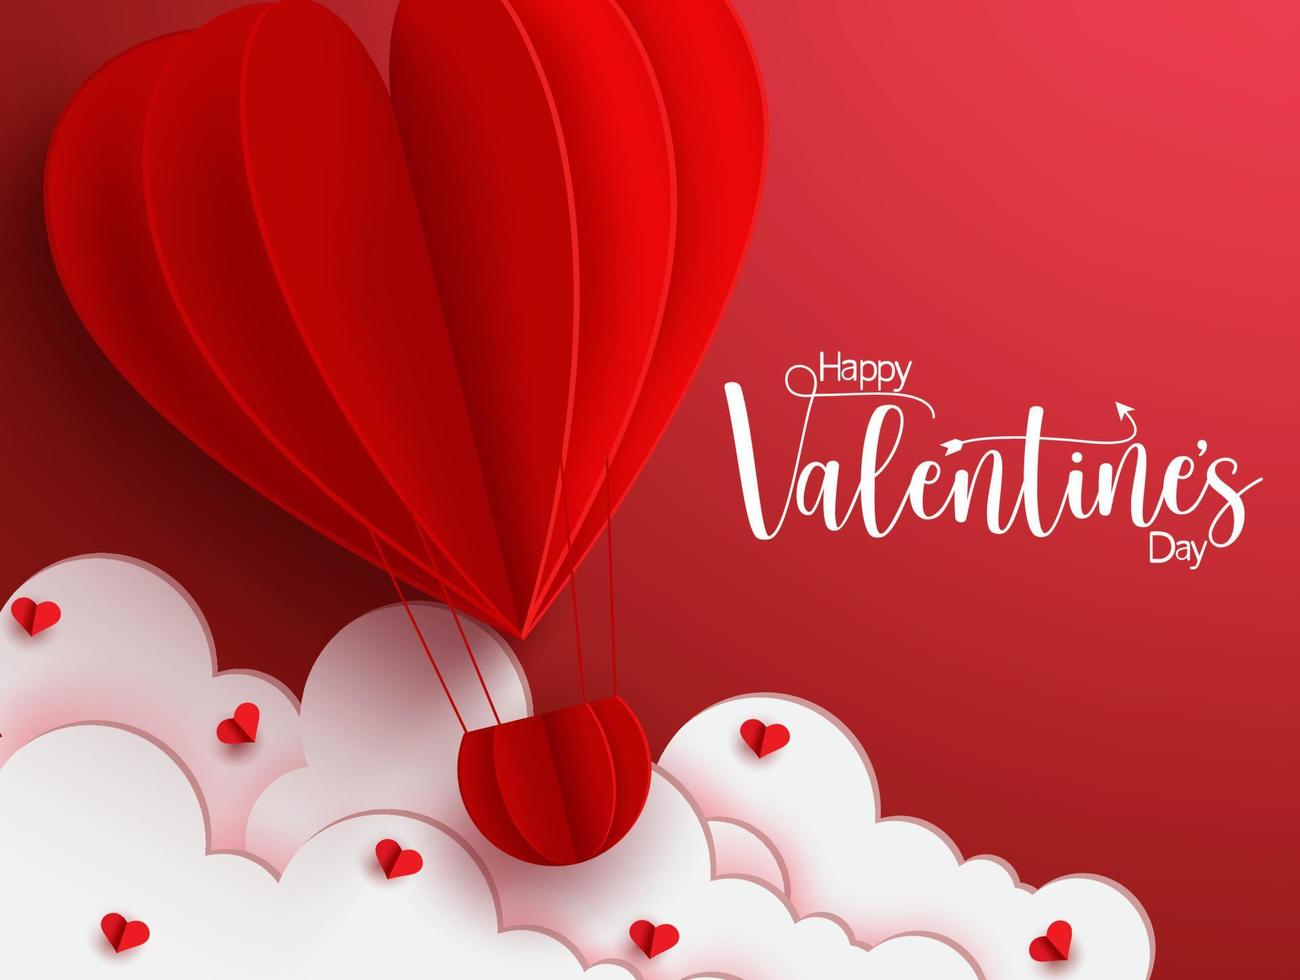 Valentine's vector background template. Happy valentine's day text with heart shape hot air balloon element paper cut design with empty space for valentine messages. Vector illustration